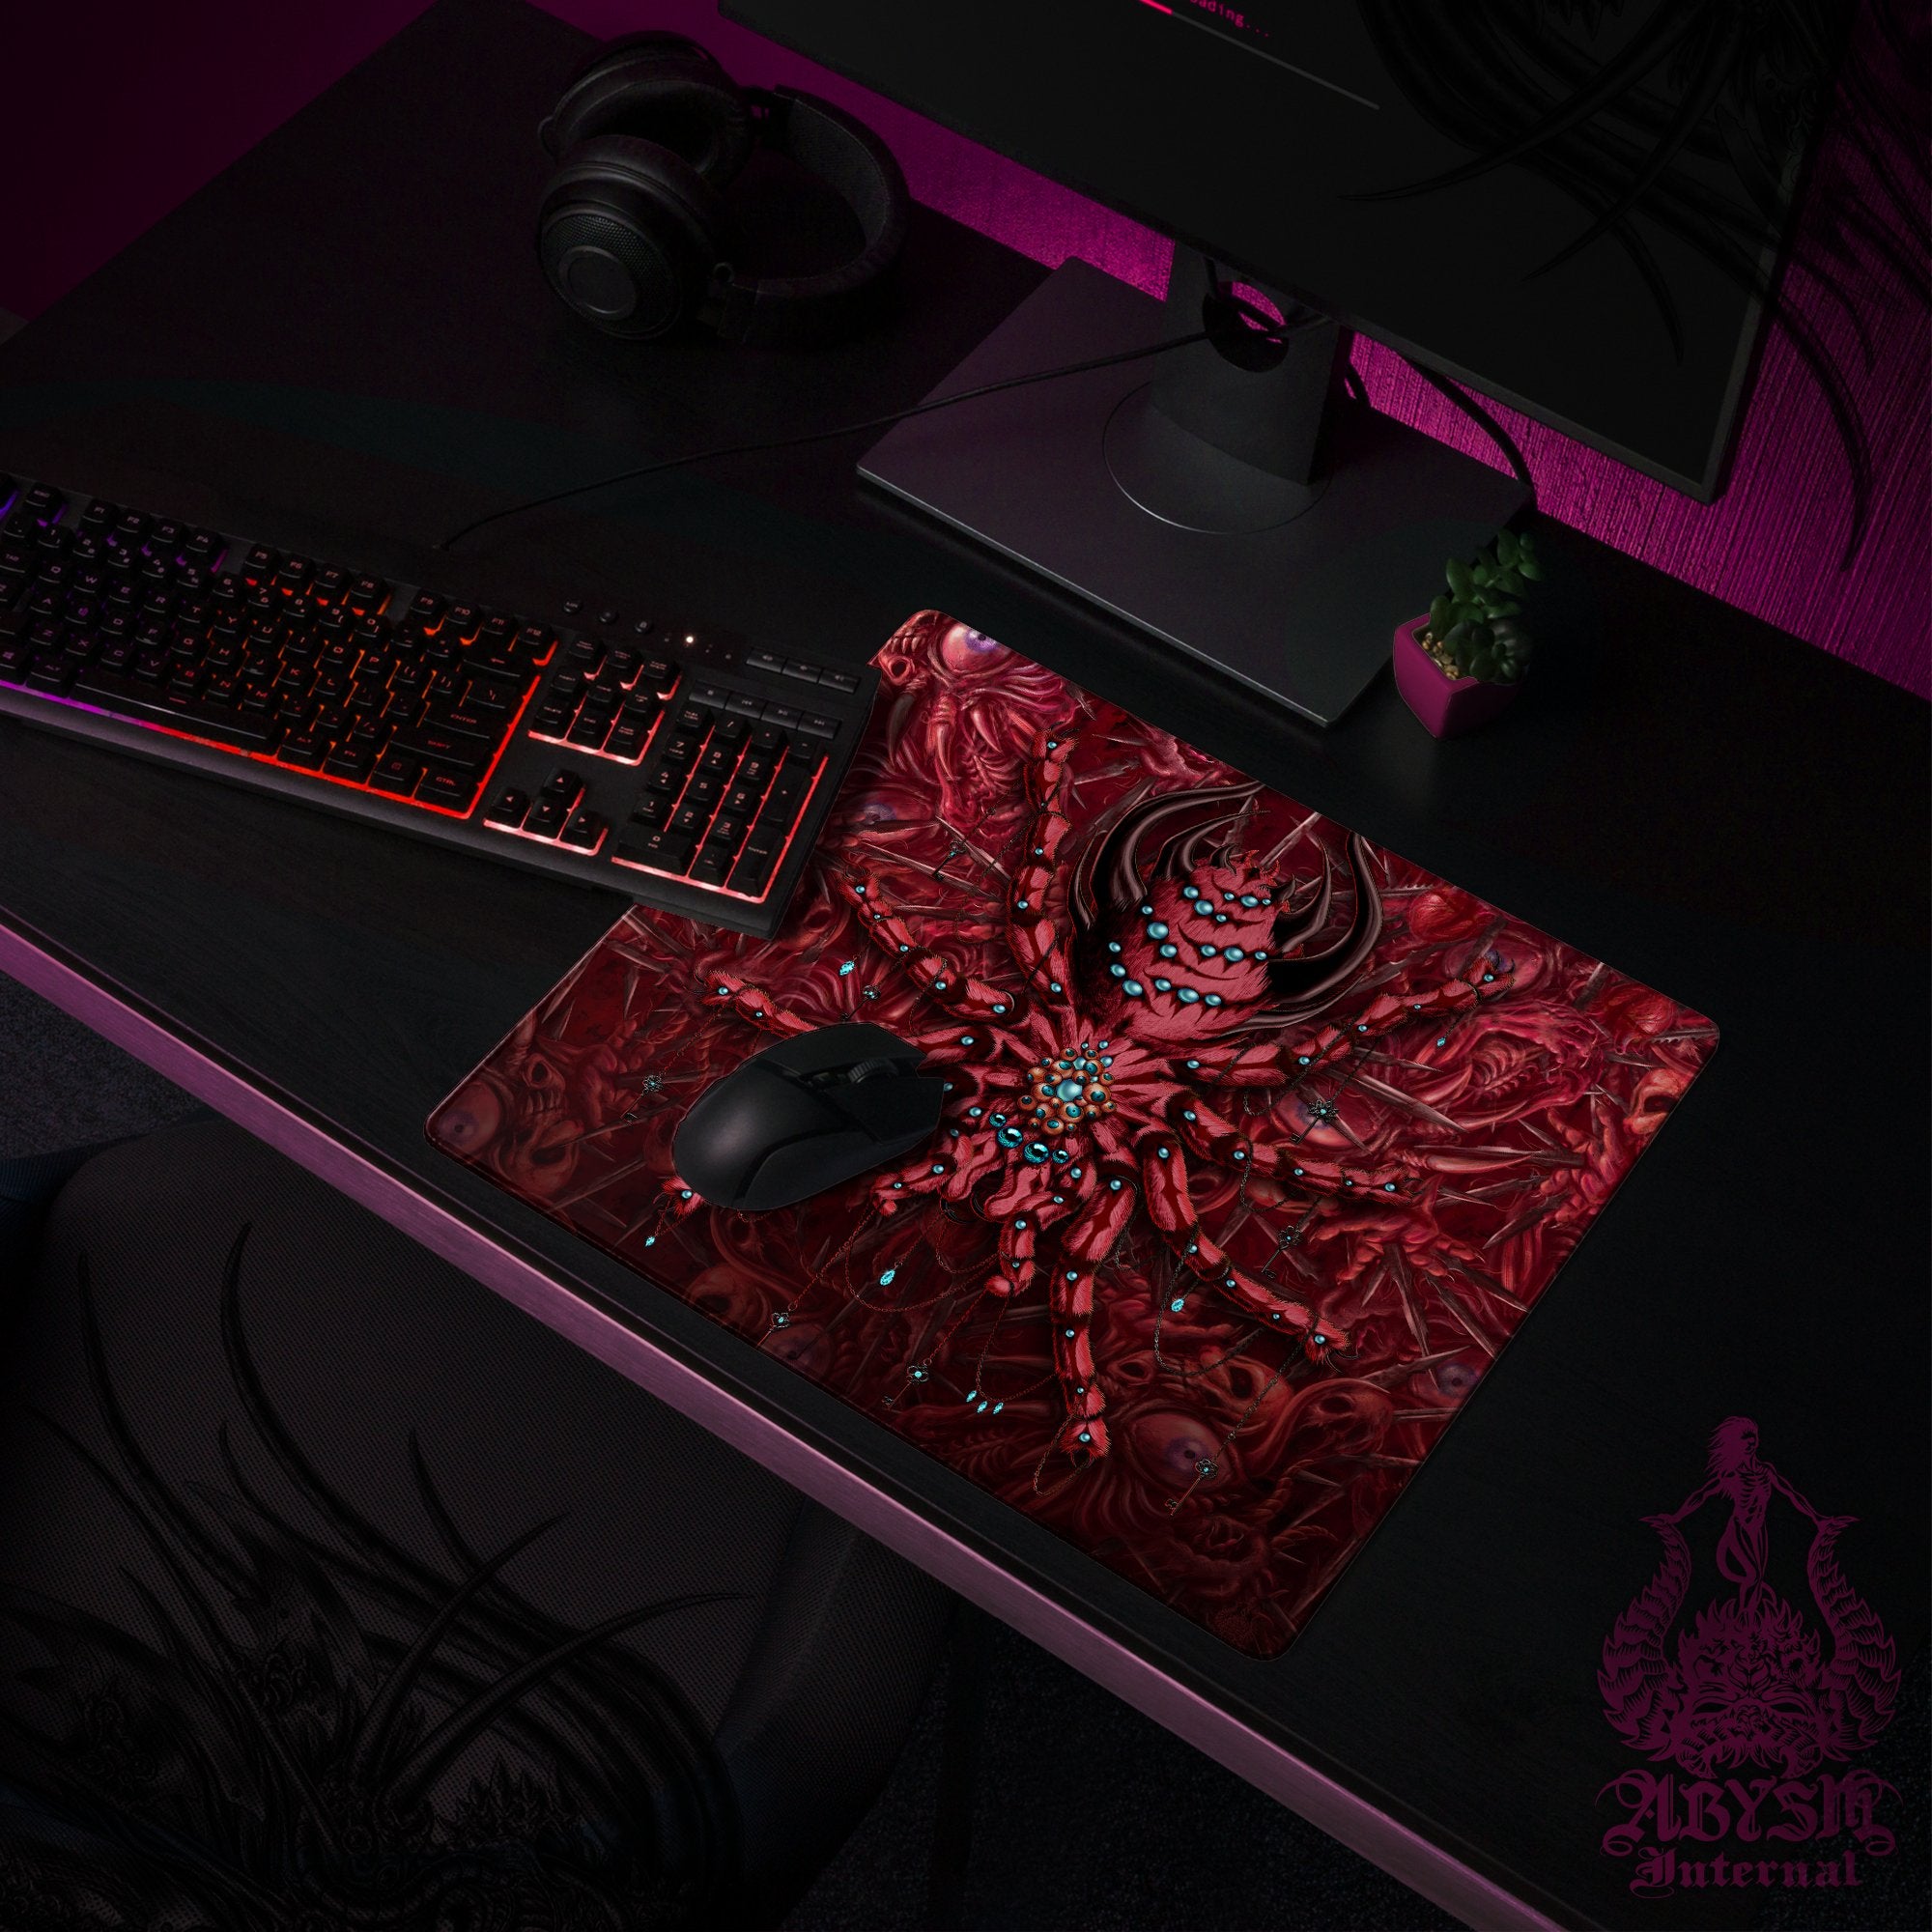 Horror Workpad, Halloween Desk Mat, Monster Spider Gaming Mouse Pad, Tarantula Table Protector Cover, Gore and Blood Art Print - Abysm Internal